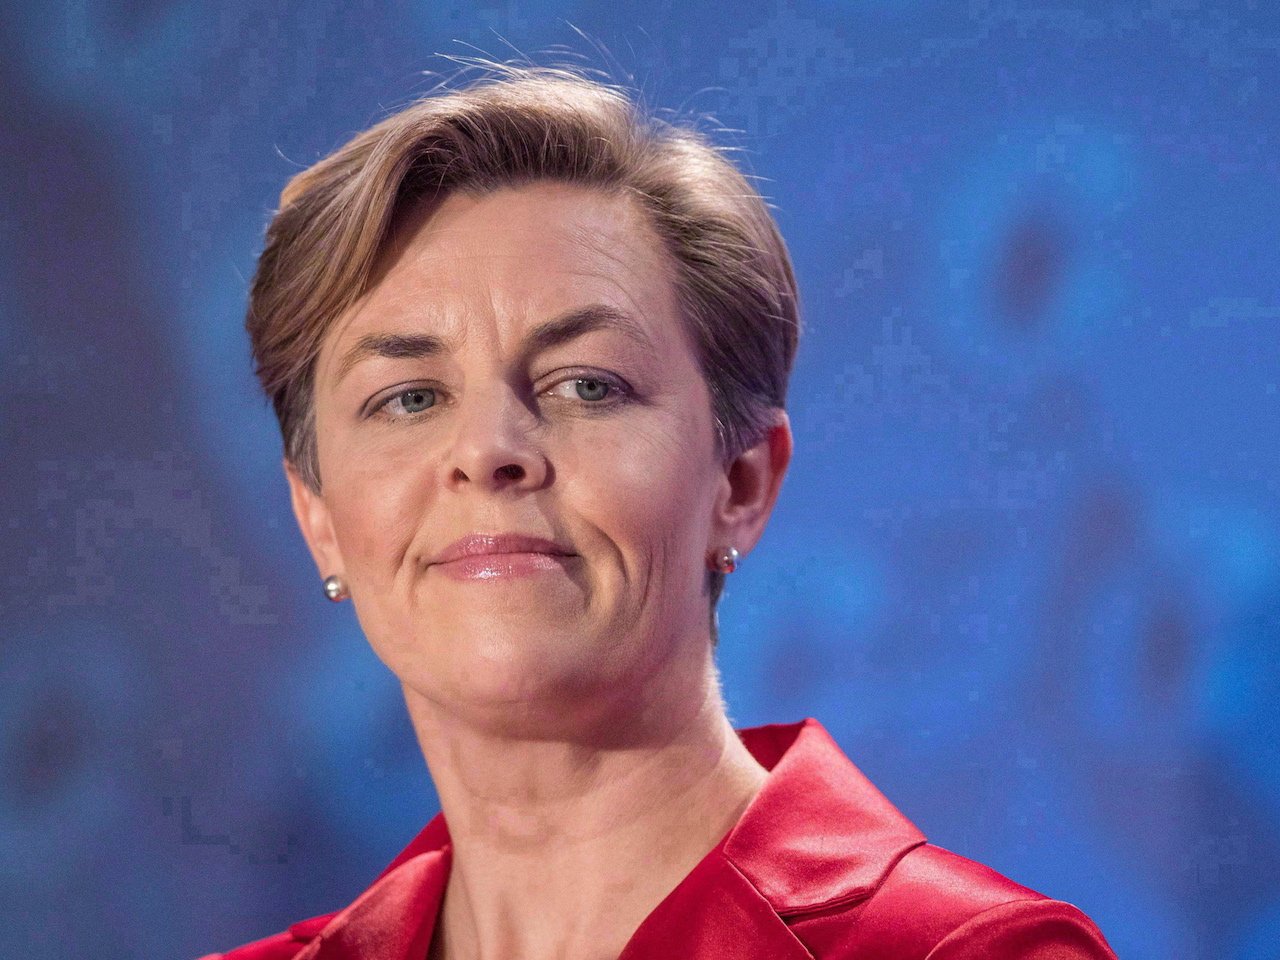 Conservative leadership candidate Kellie Leitch speaks during the Conservative leadership debate in Saskatoon, Wednesday, November 9, 2016. Police are investigating a banner draped over Ontario MP Leitch's constituency office that invokes the Quebec City mosque shooting and urges the controversial Conservative leadership candidate to resign. THE CANADIAN PRESS/Liam Richards